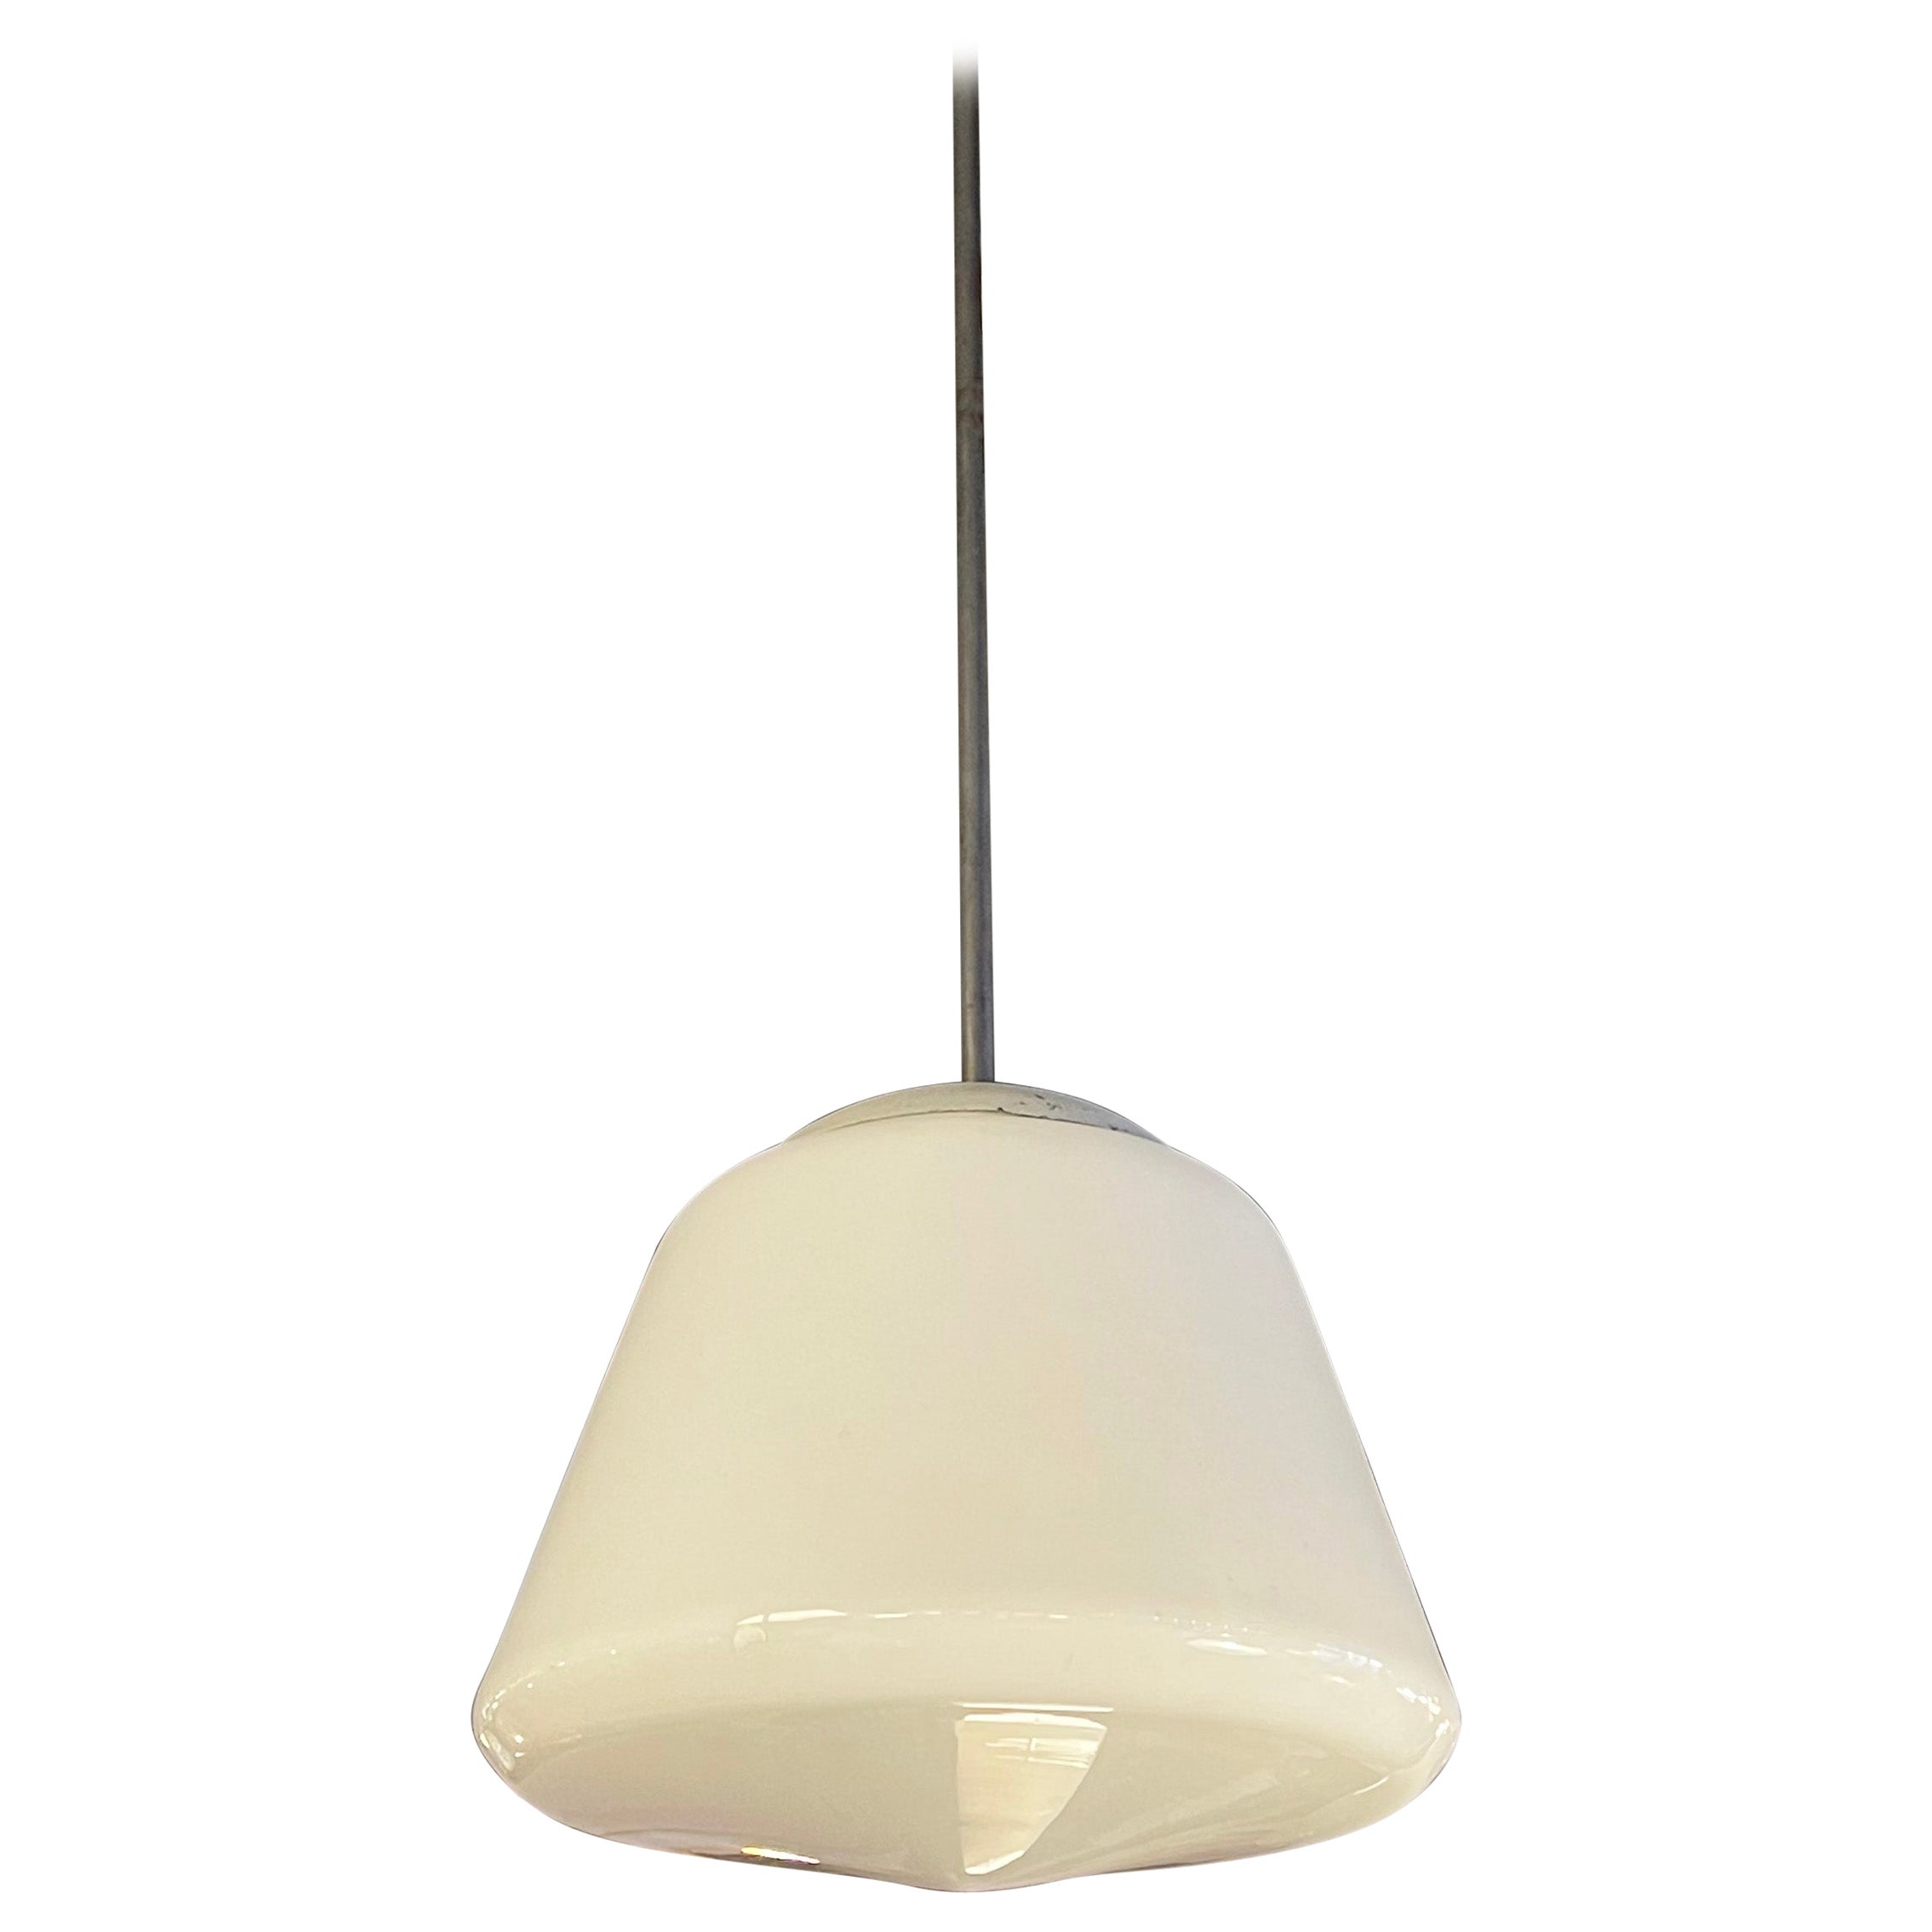 Large Conical Milk Glass Library Pendant Light - 5 Available For Sale